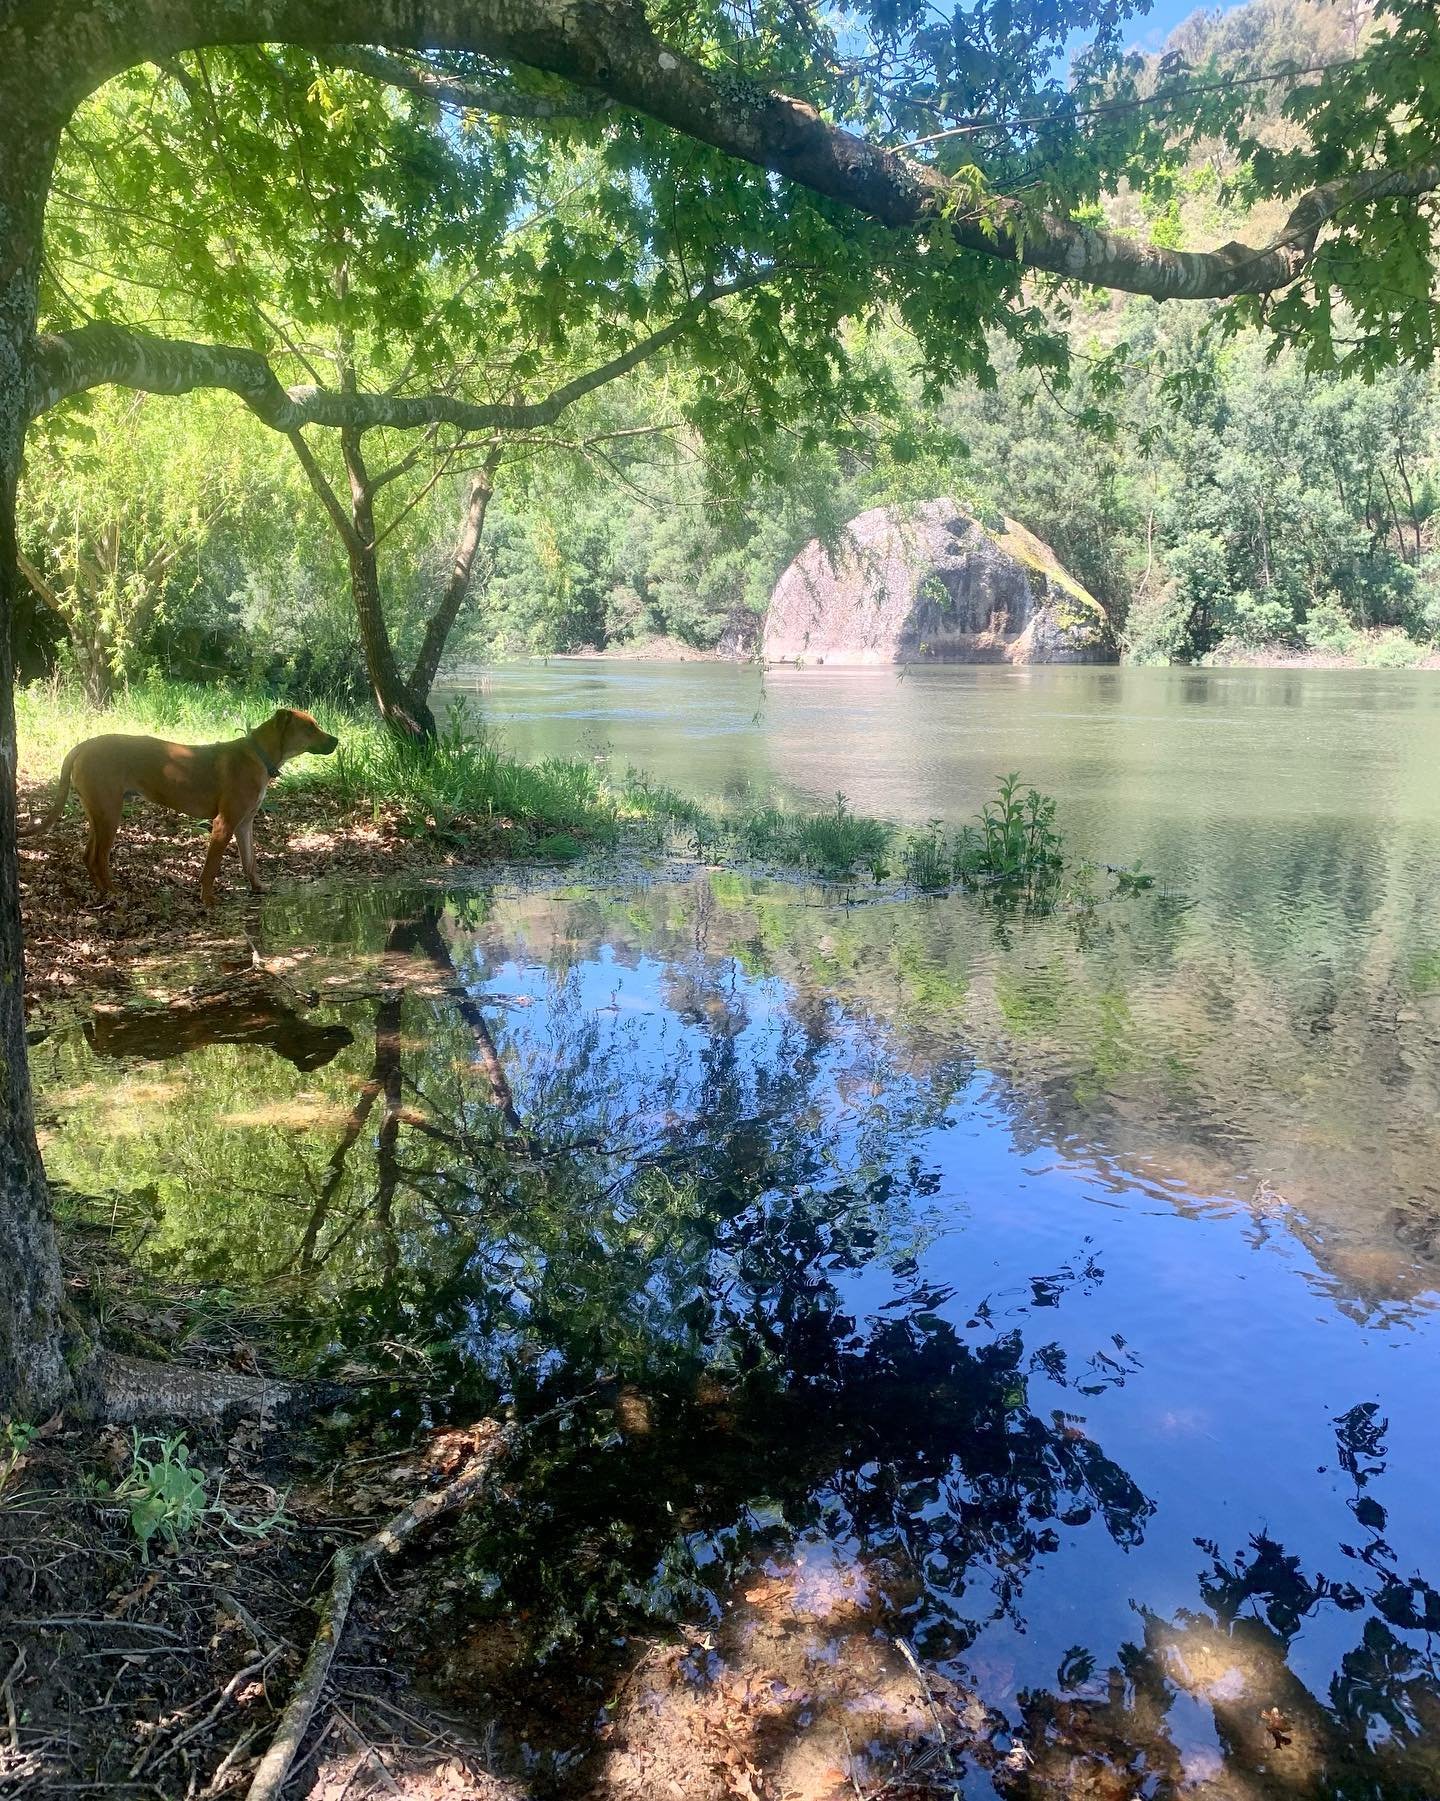 This spring the Mondego river is positively beside itself!
Magical times at Quinta da Lontra! ✨🤩🐾💙💚

#mondegoriver #centralportugal #nature #springtime #river #reflection #dog #ridgeback #waterreflection #beautifulriver #rivervalley #forestbathin